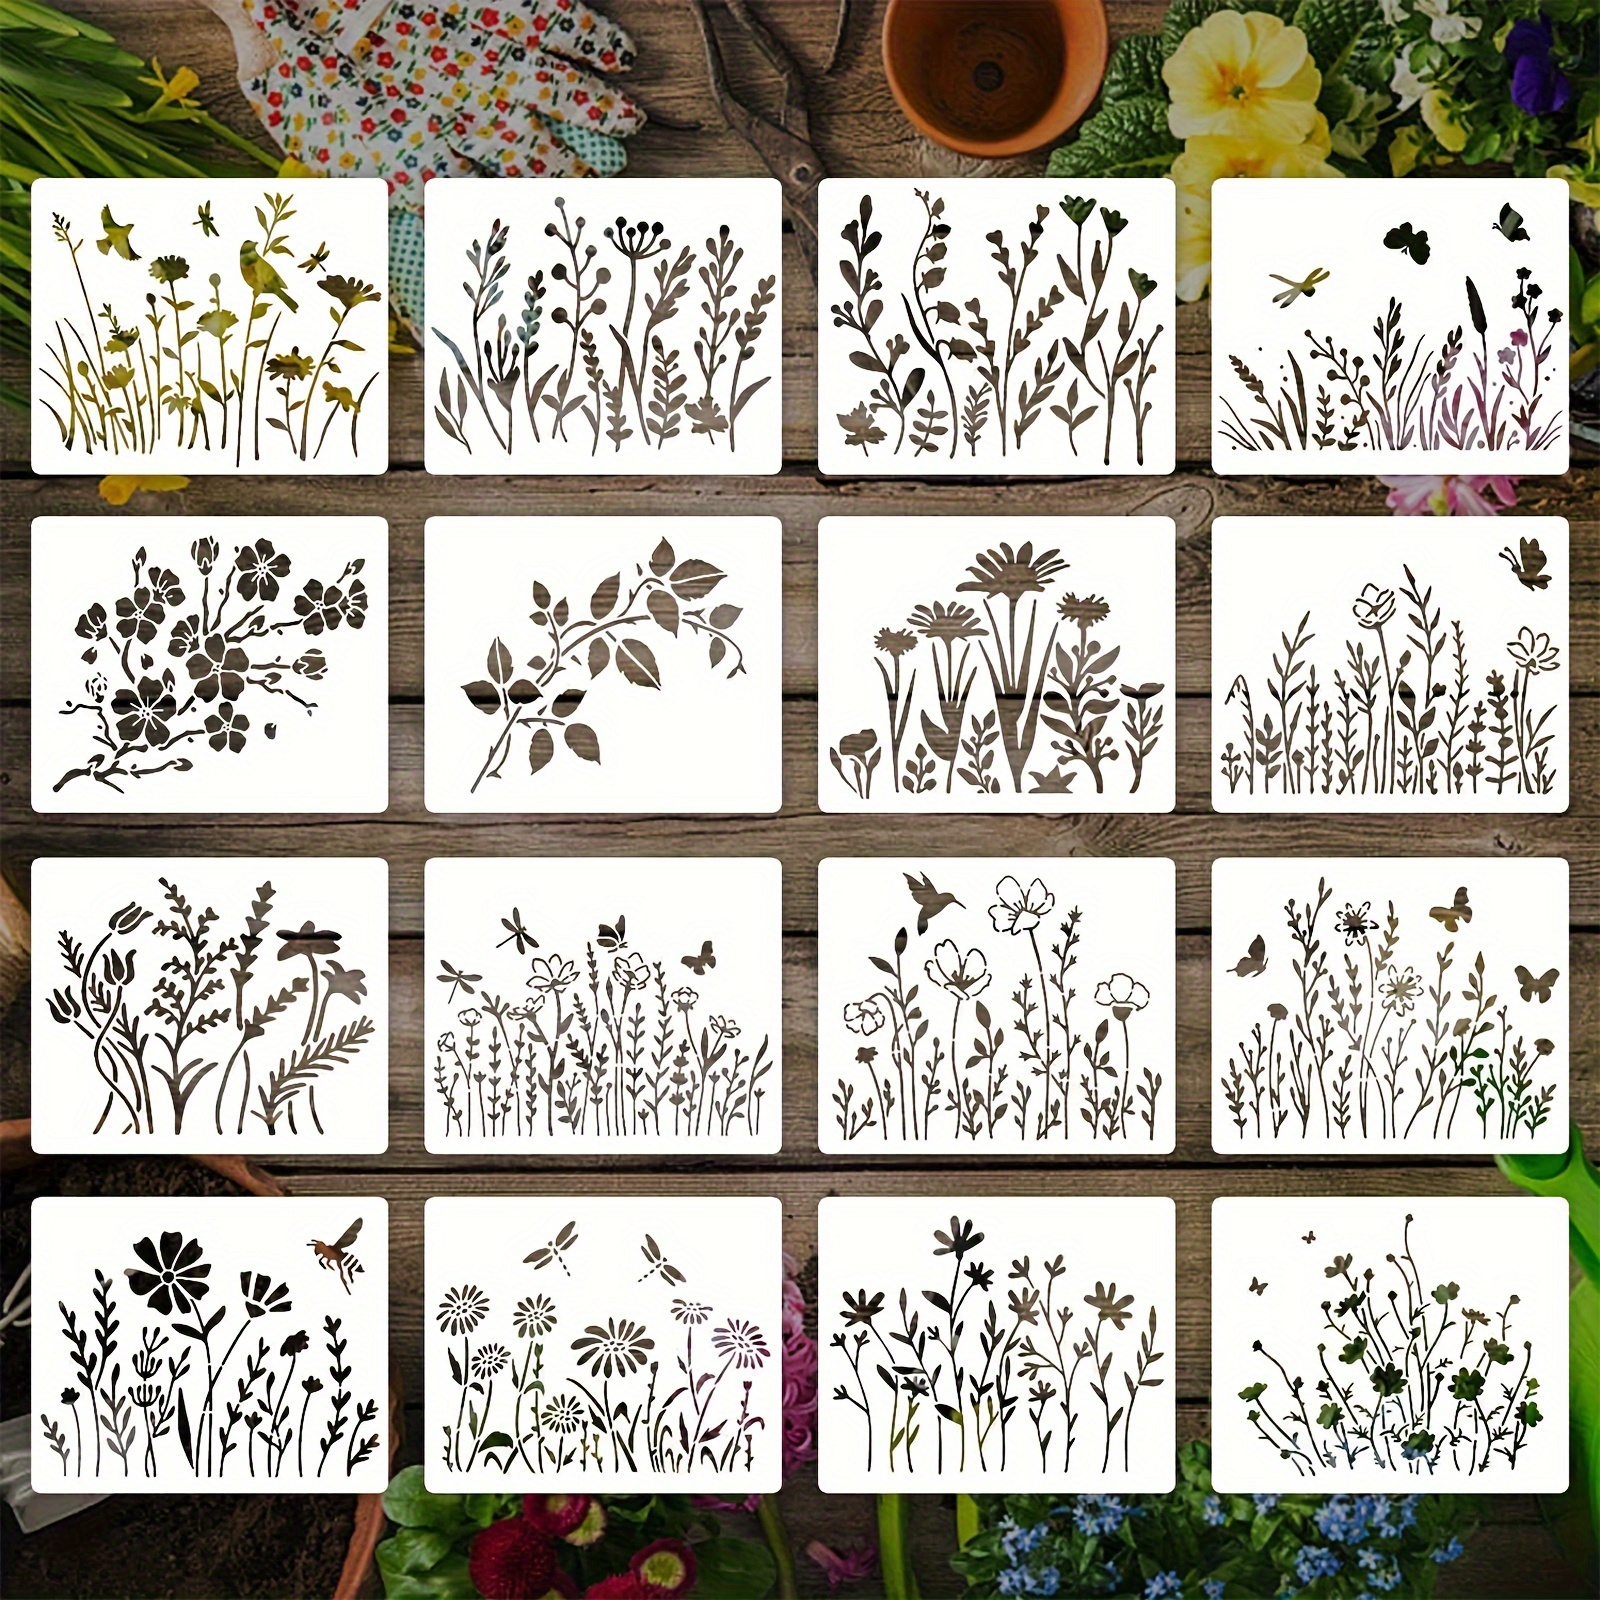 Flower Stencils for Painting, 64pcs 3 Inch Stencils for Crafts Rock  Painting Stencils Plastic Reusable Stencils for Painting on Wood Wall Tile  Home